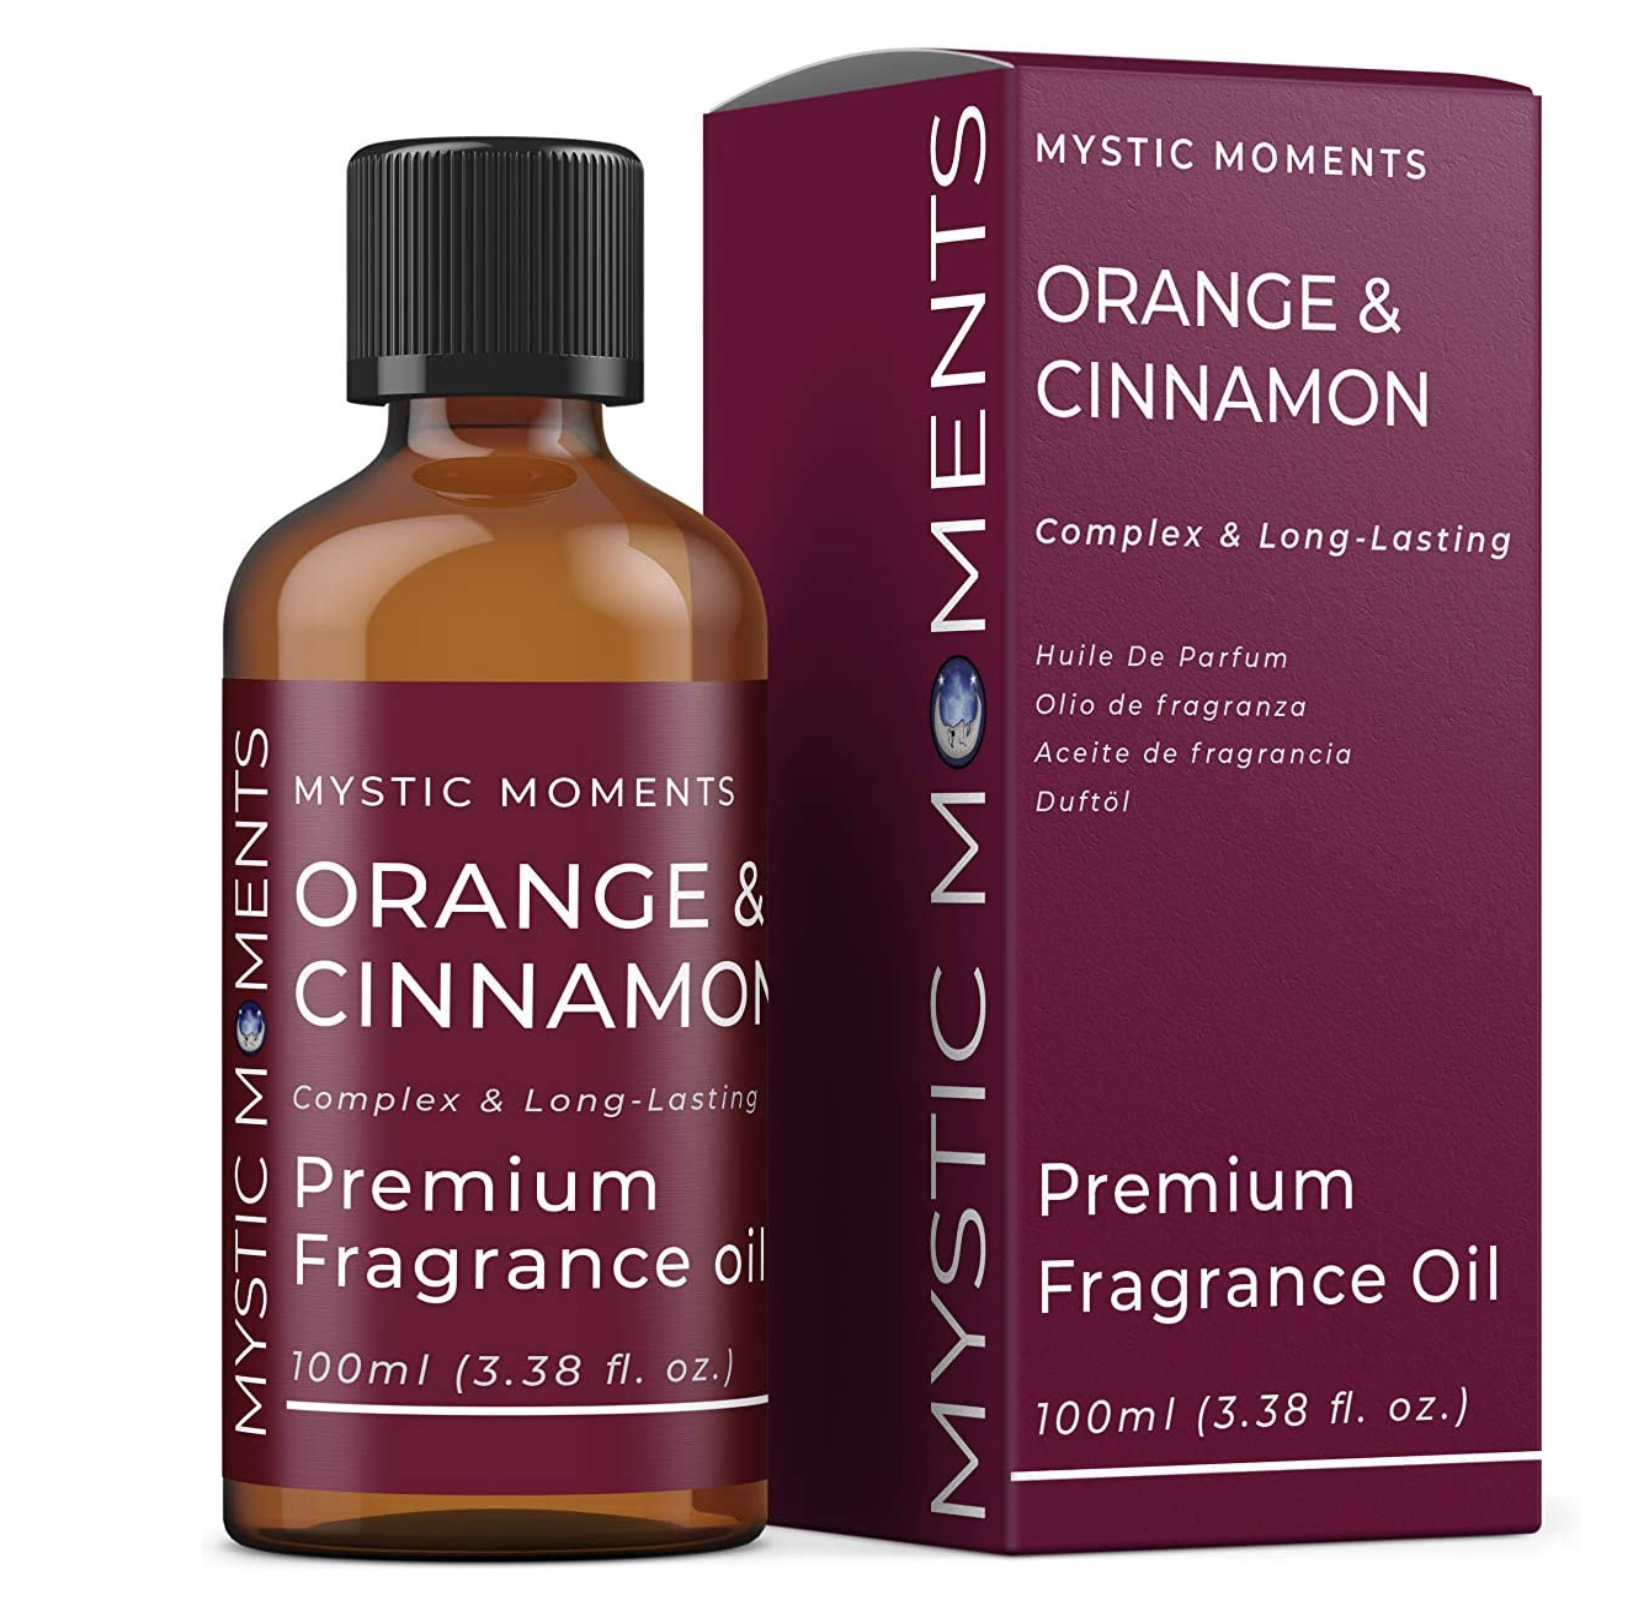  Cinnamon & Orange Fragrance Oil, 100ml (Packaging may vary) - Perfect for Soaps, Candles, Bath Bombs, Oil Burners, Diffusers and Skin & Hair Care Items 